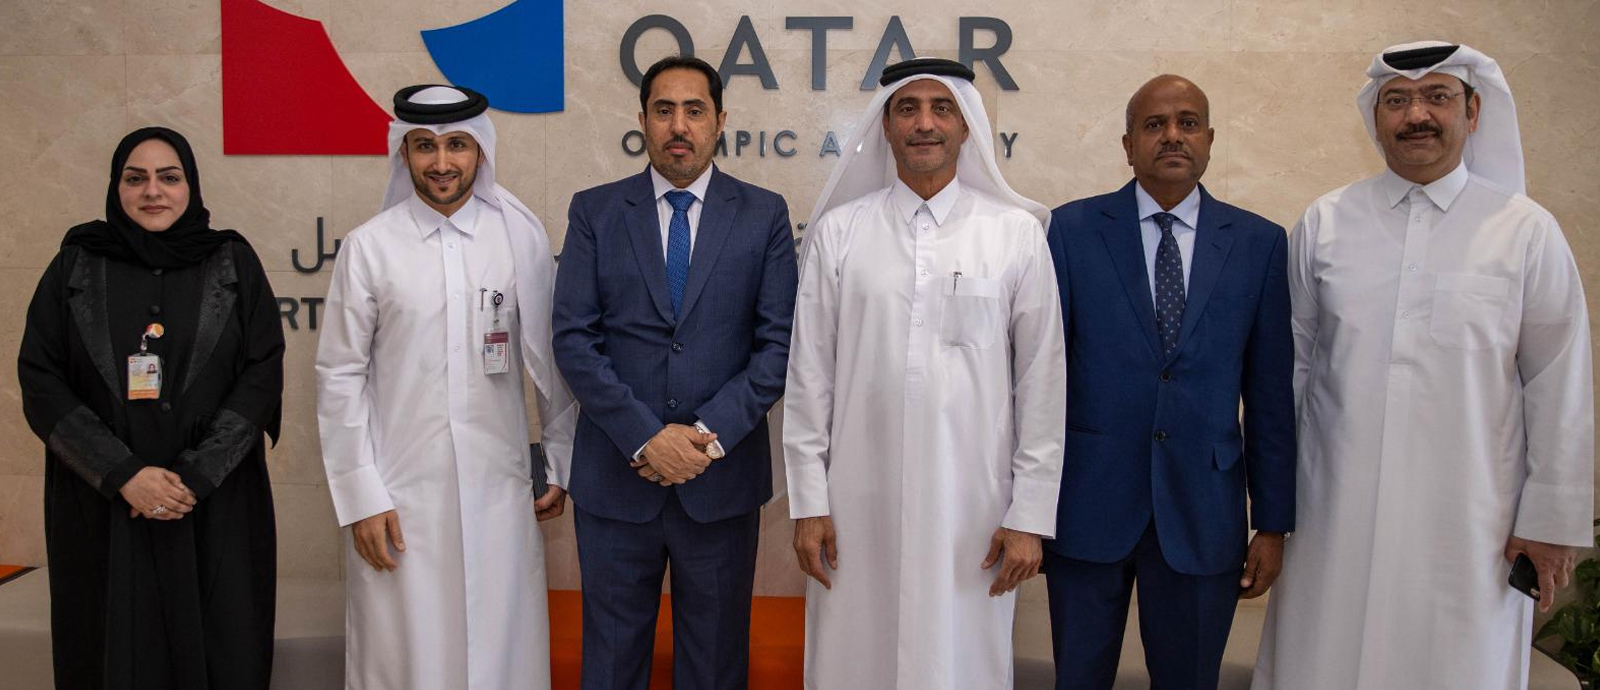 Yemeni Minister of Youth and Sports Visits Qatar Olympic Academy